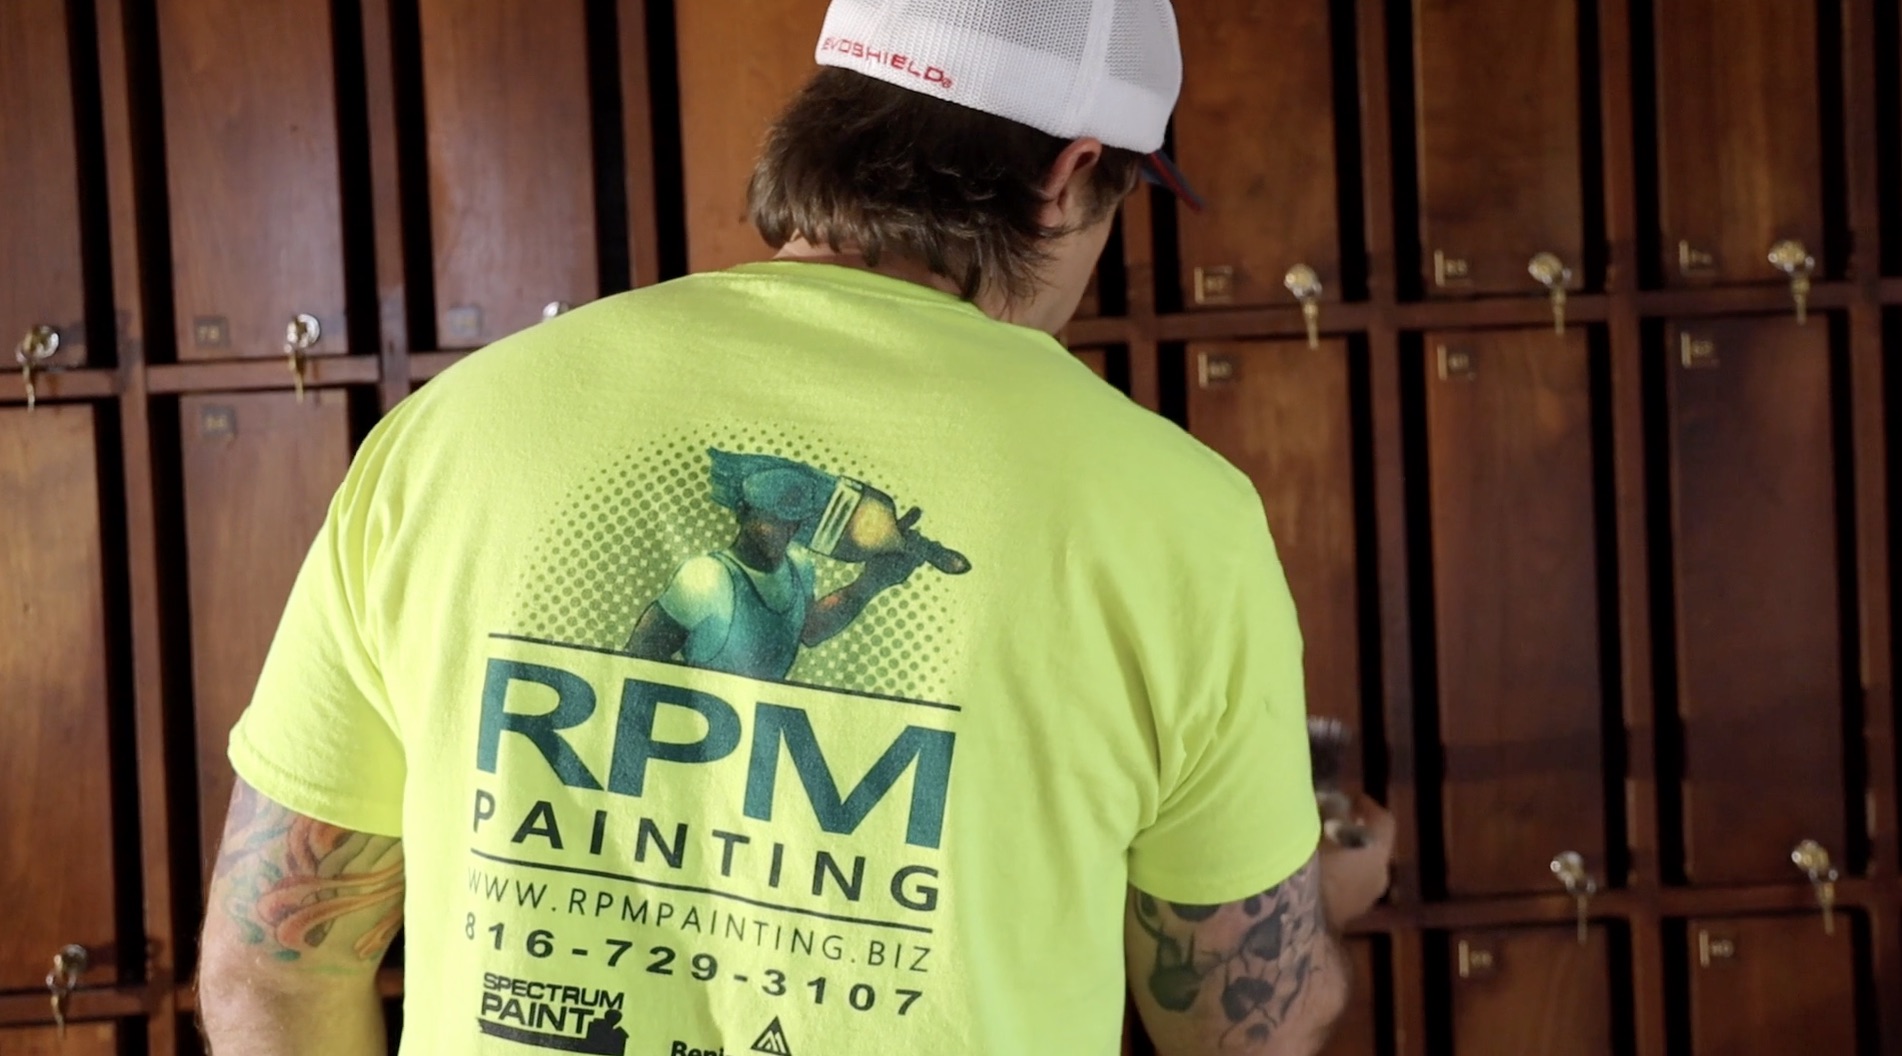 Expert Commercial Painting and Home Improvement Services in Leawood, KS by RPM Painting